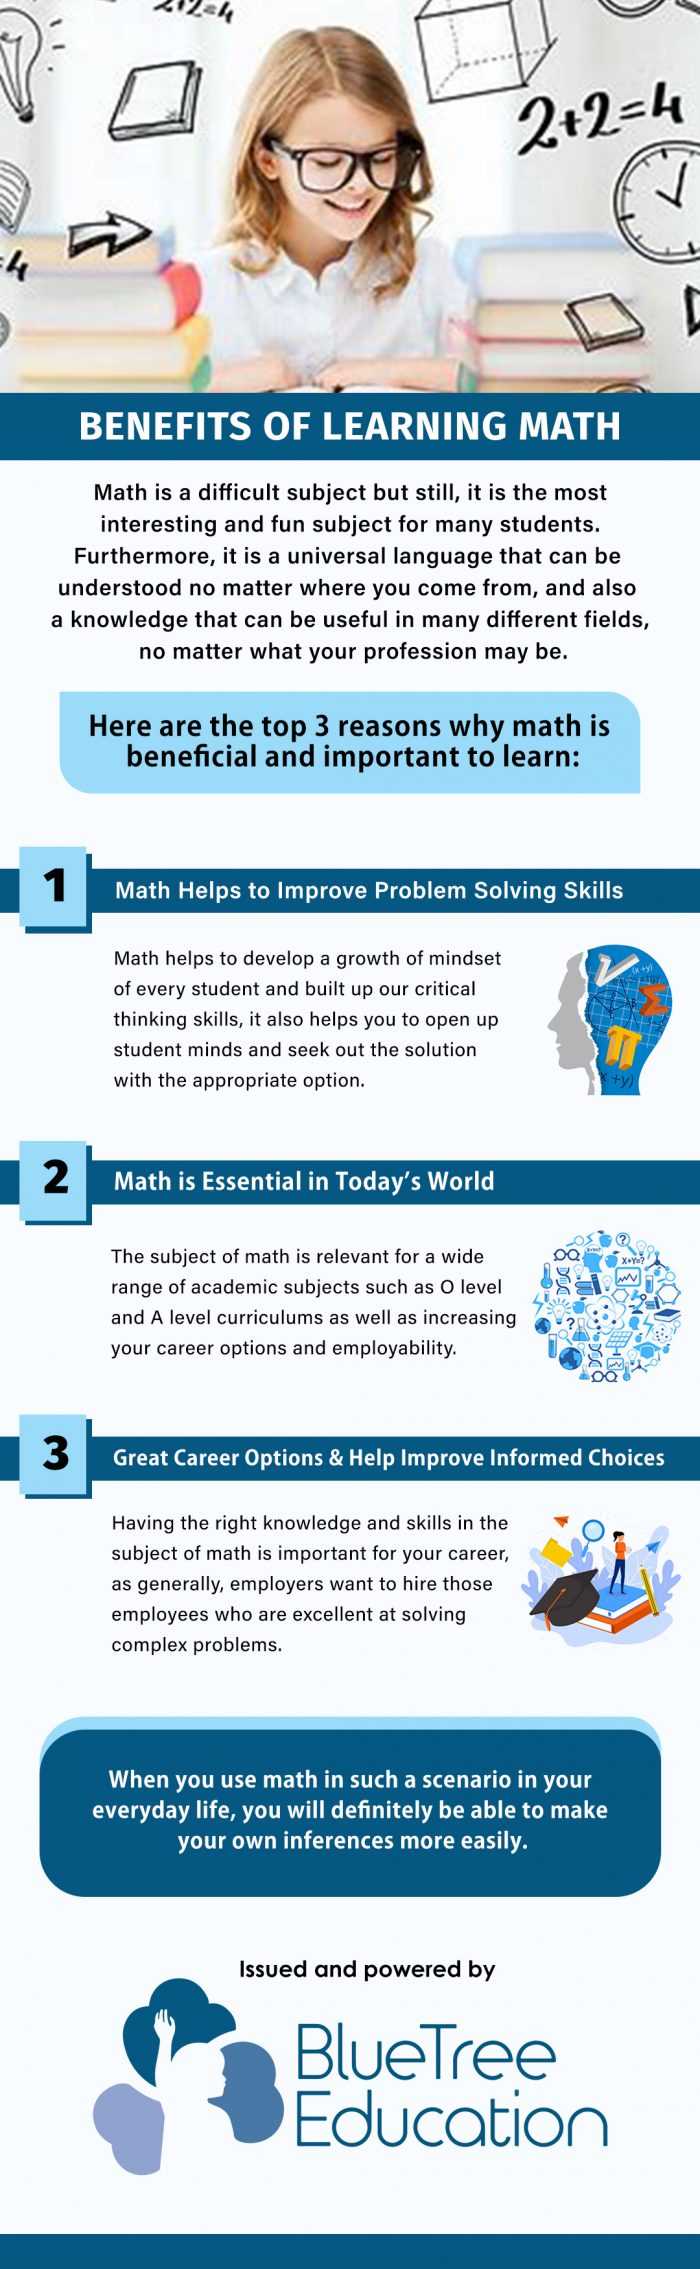 Benefits of Learning Math